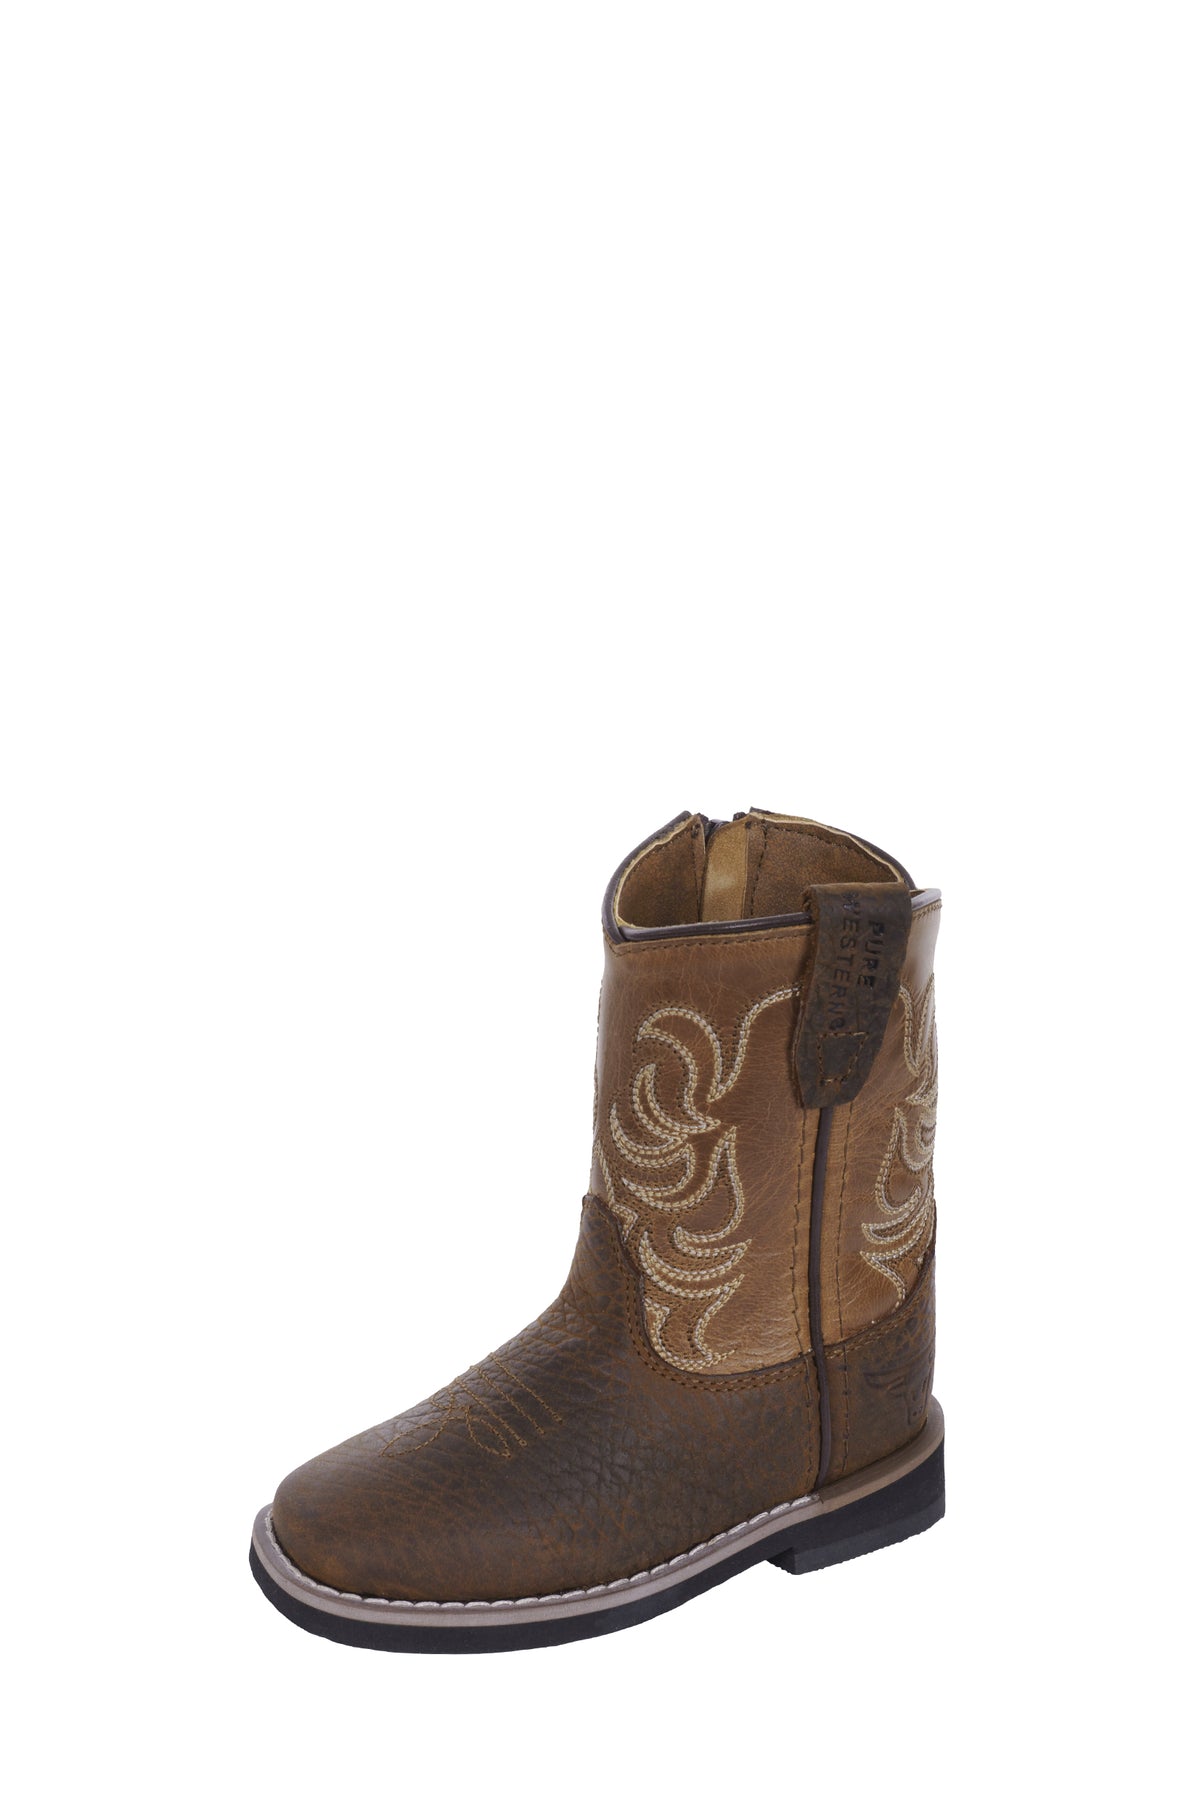 Pure Western Toddlers Lincoln Boot - Brown/Tan